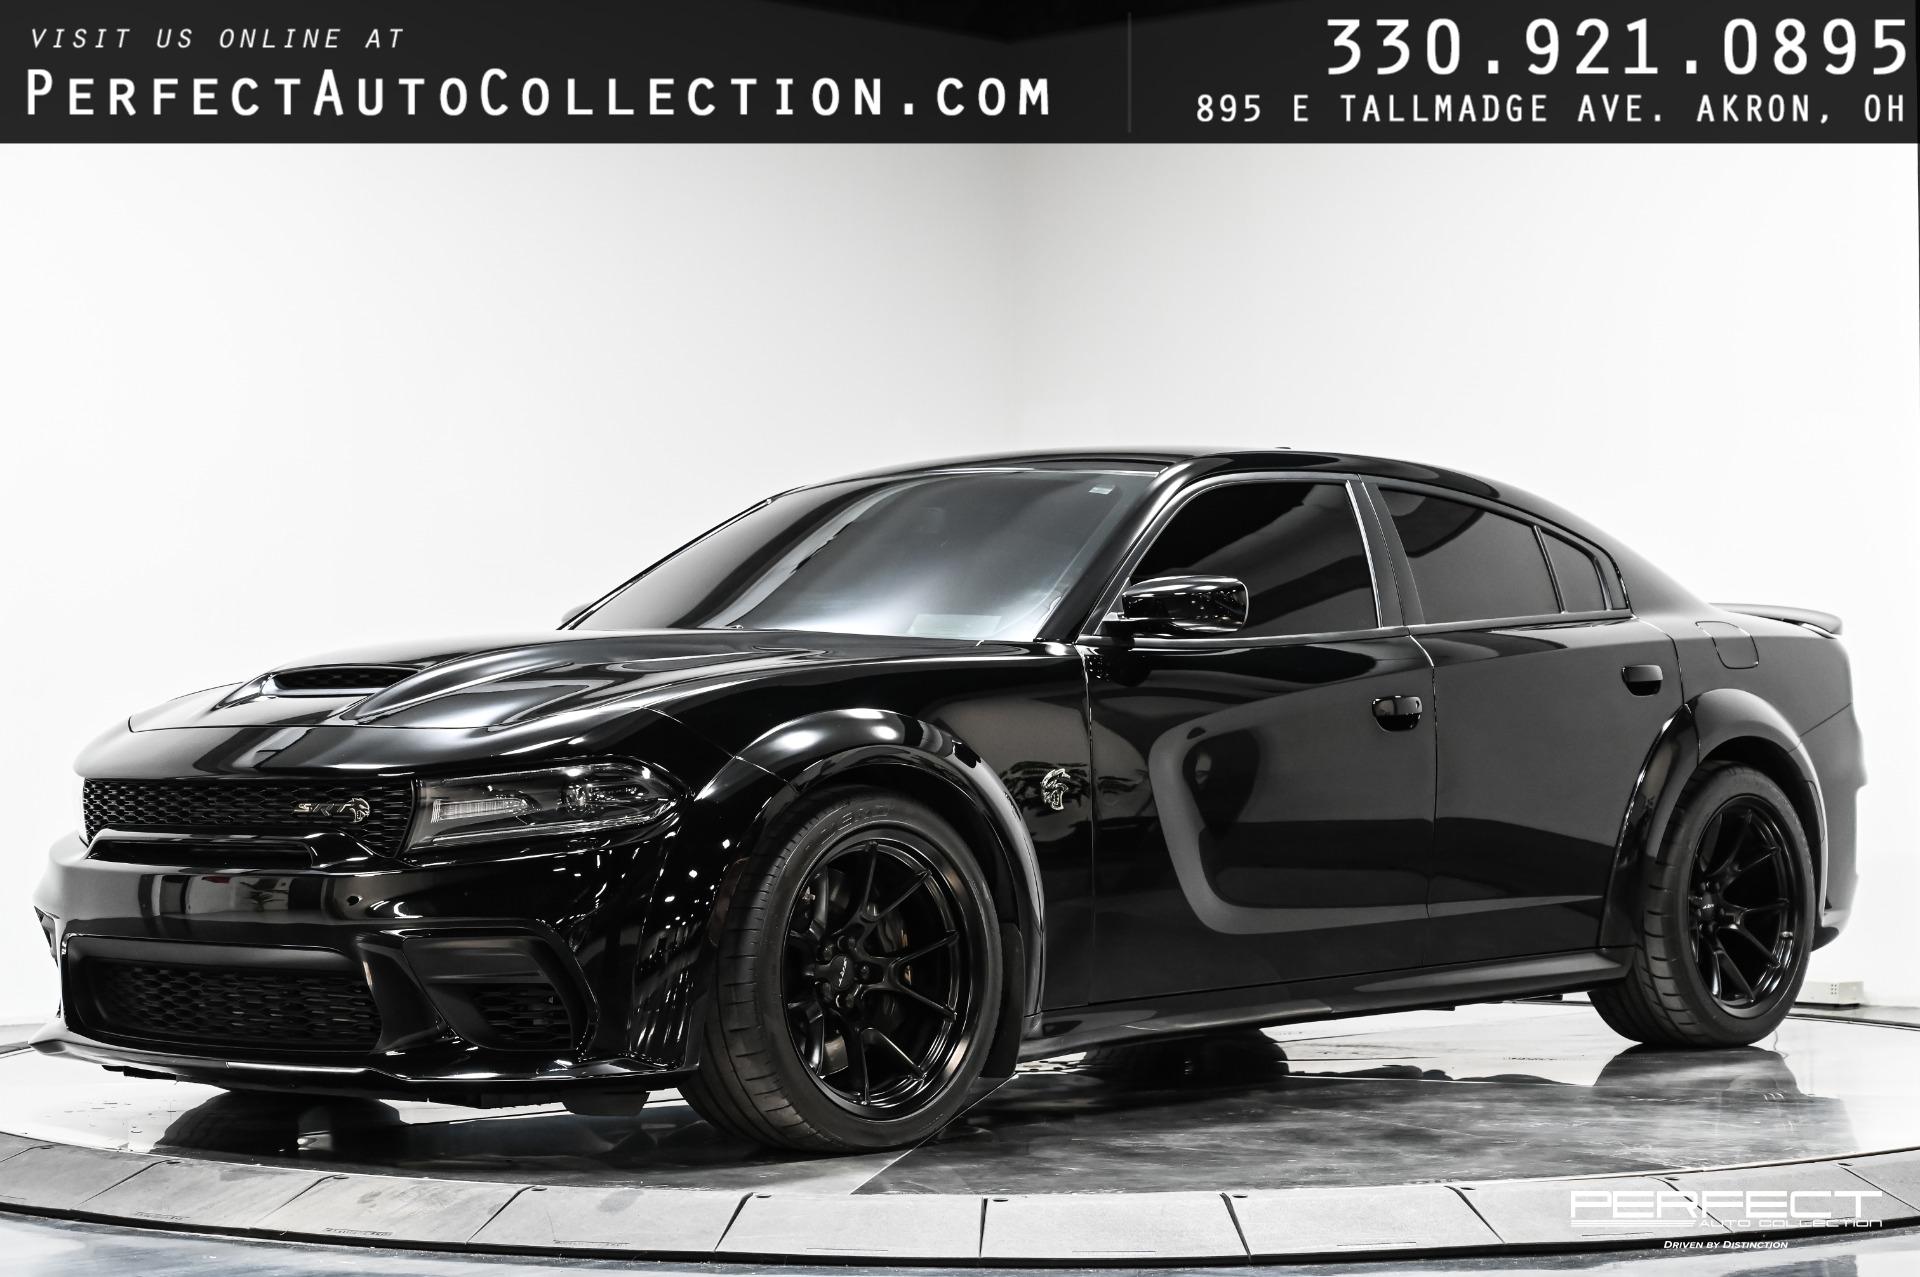 Used 2021 Dodge Charger SRT Hellcat Widebody For Sale (Sold